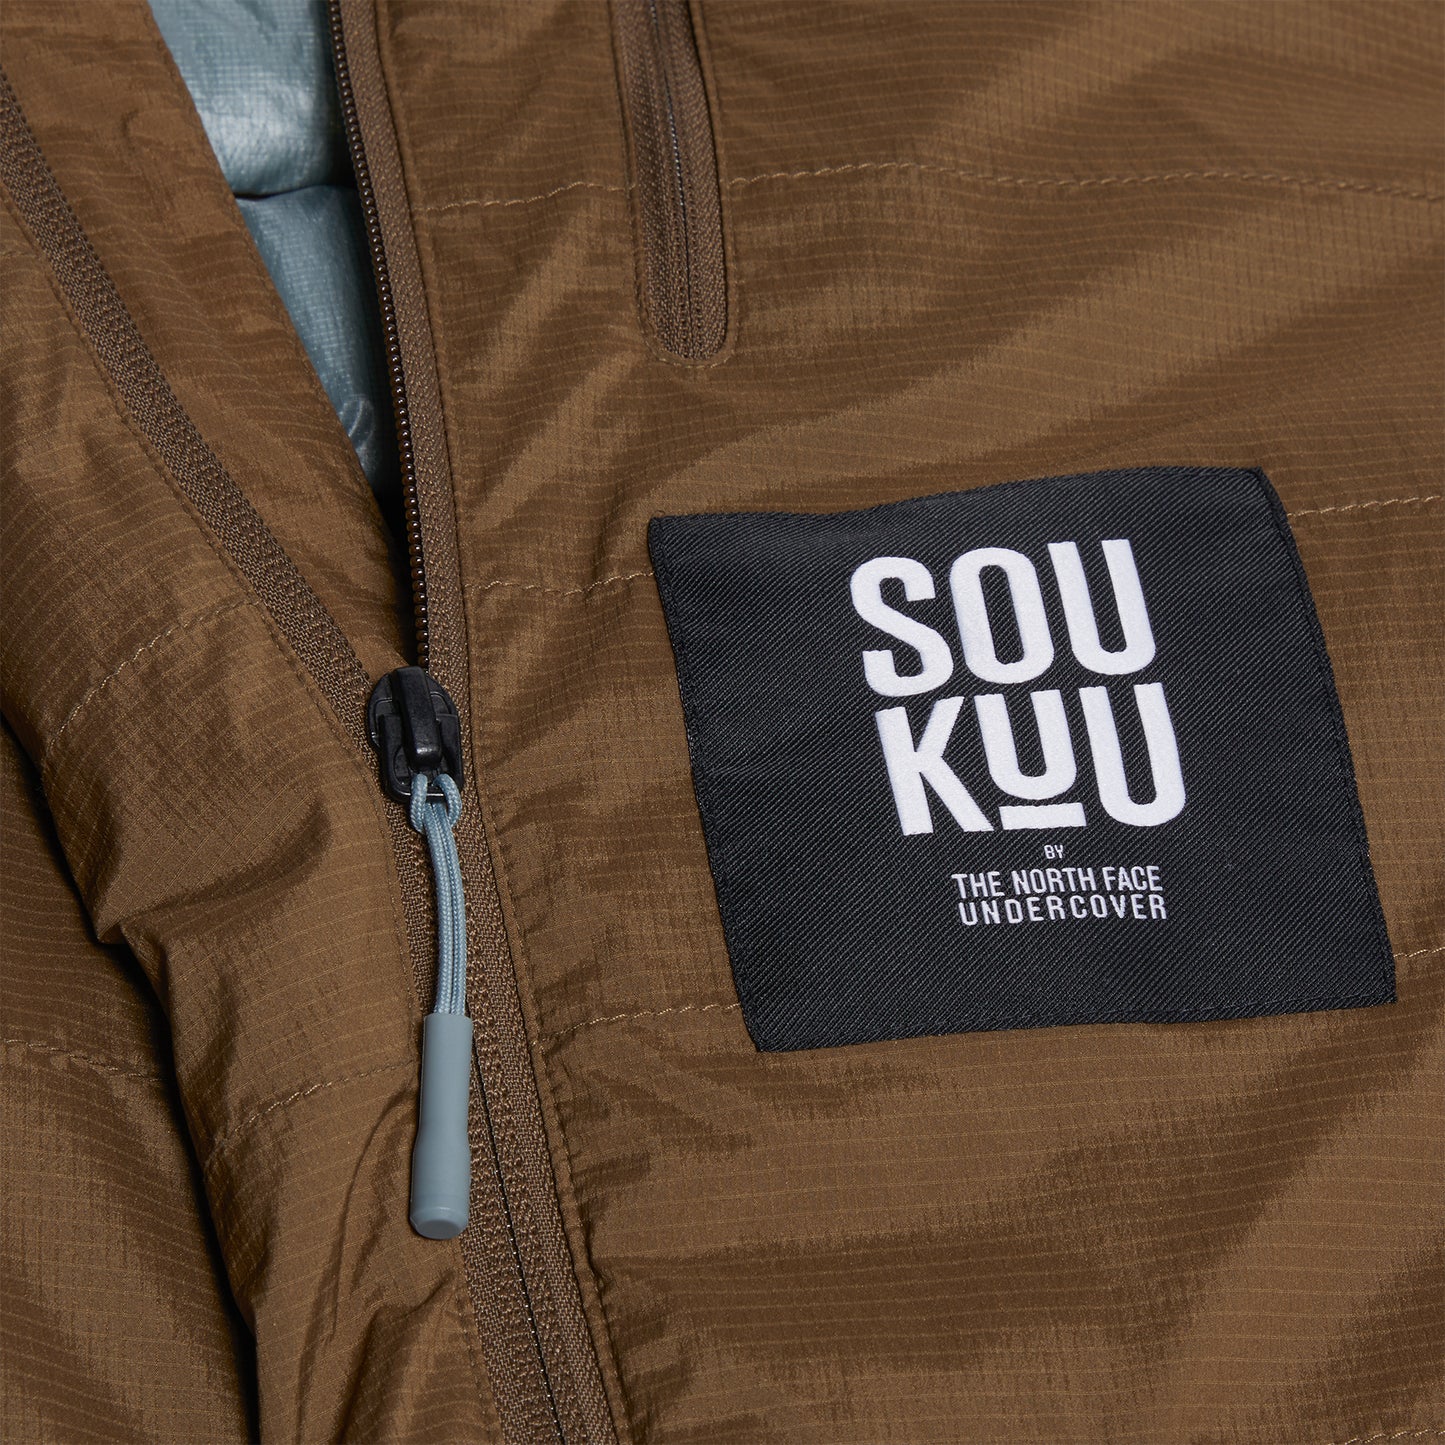 The North Face x UNDERCOVER SOUKUU 50/50 Down Pant (Sepia Brown/Concrete Grey)